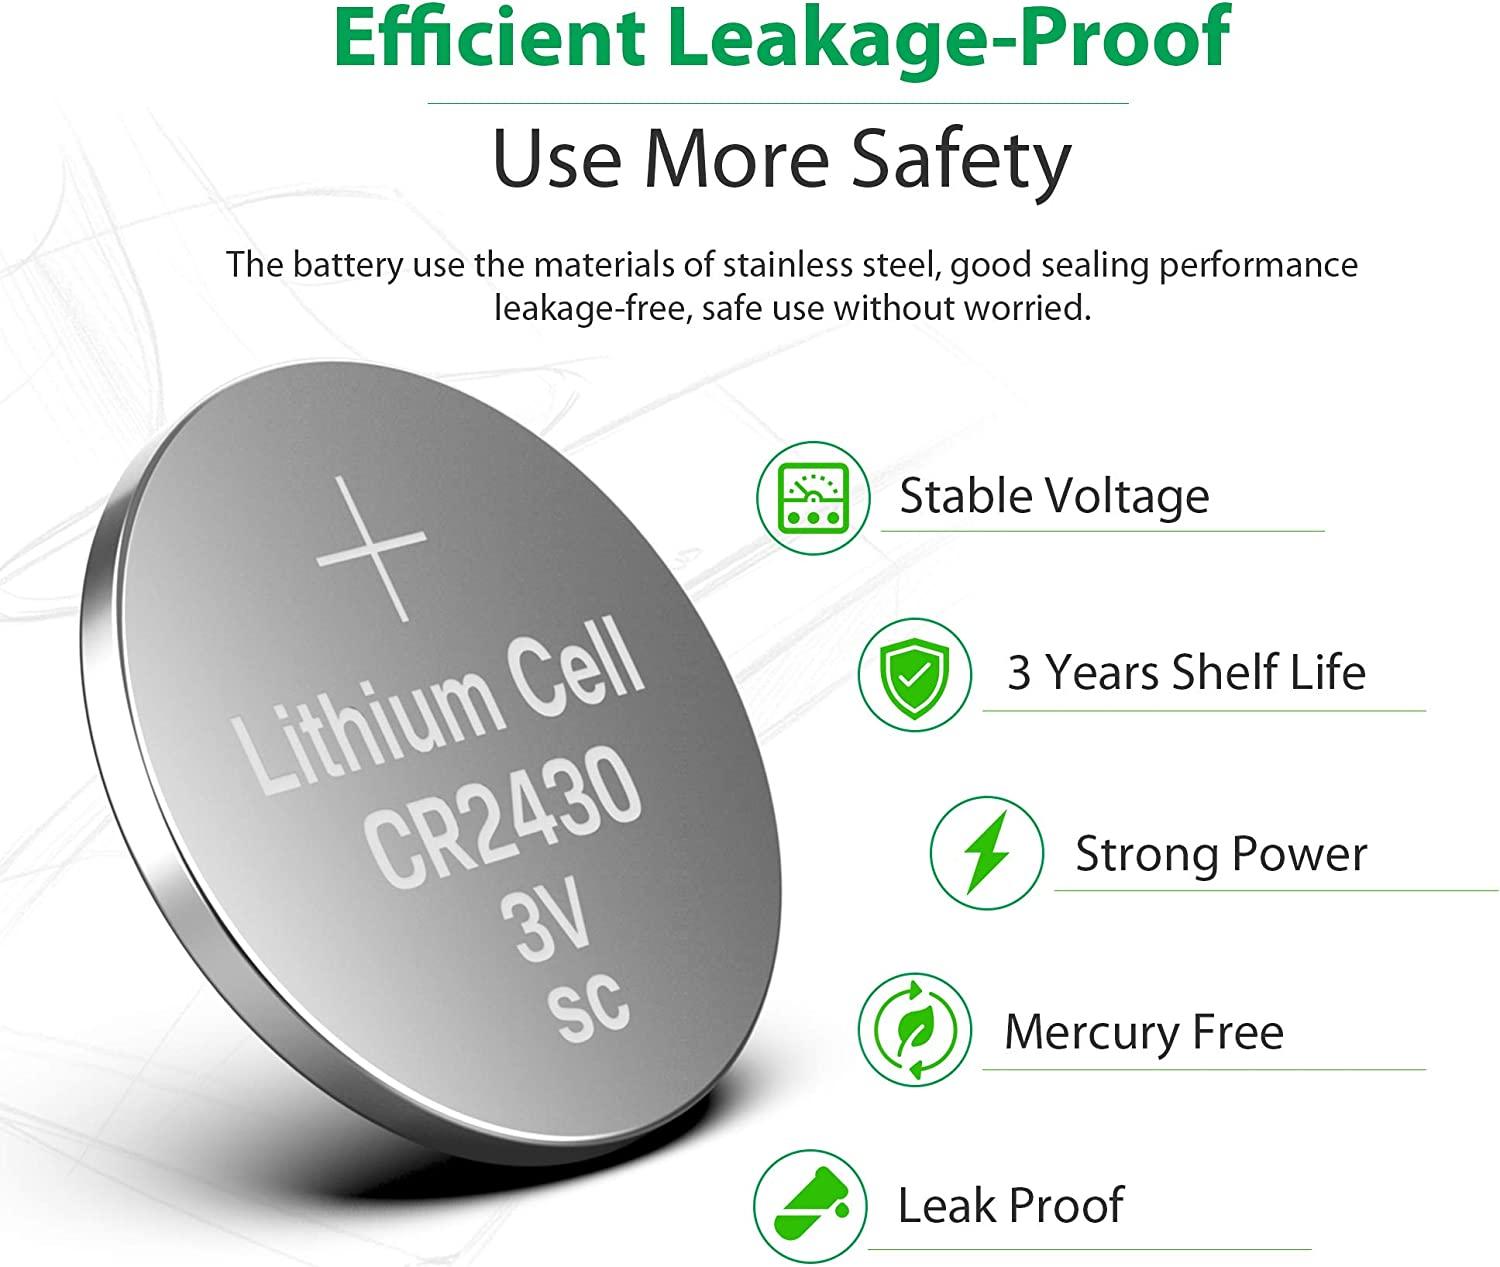 CR2430 Lithium Coin Cell Battery: The Definitive Guide